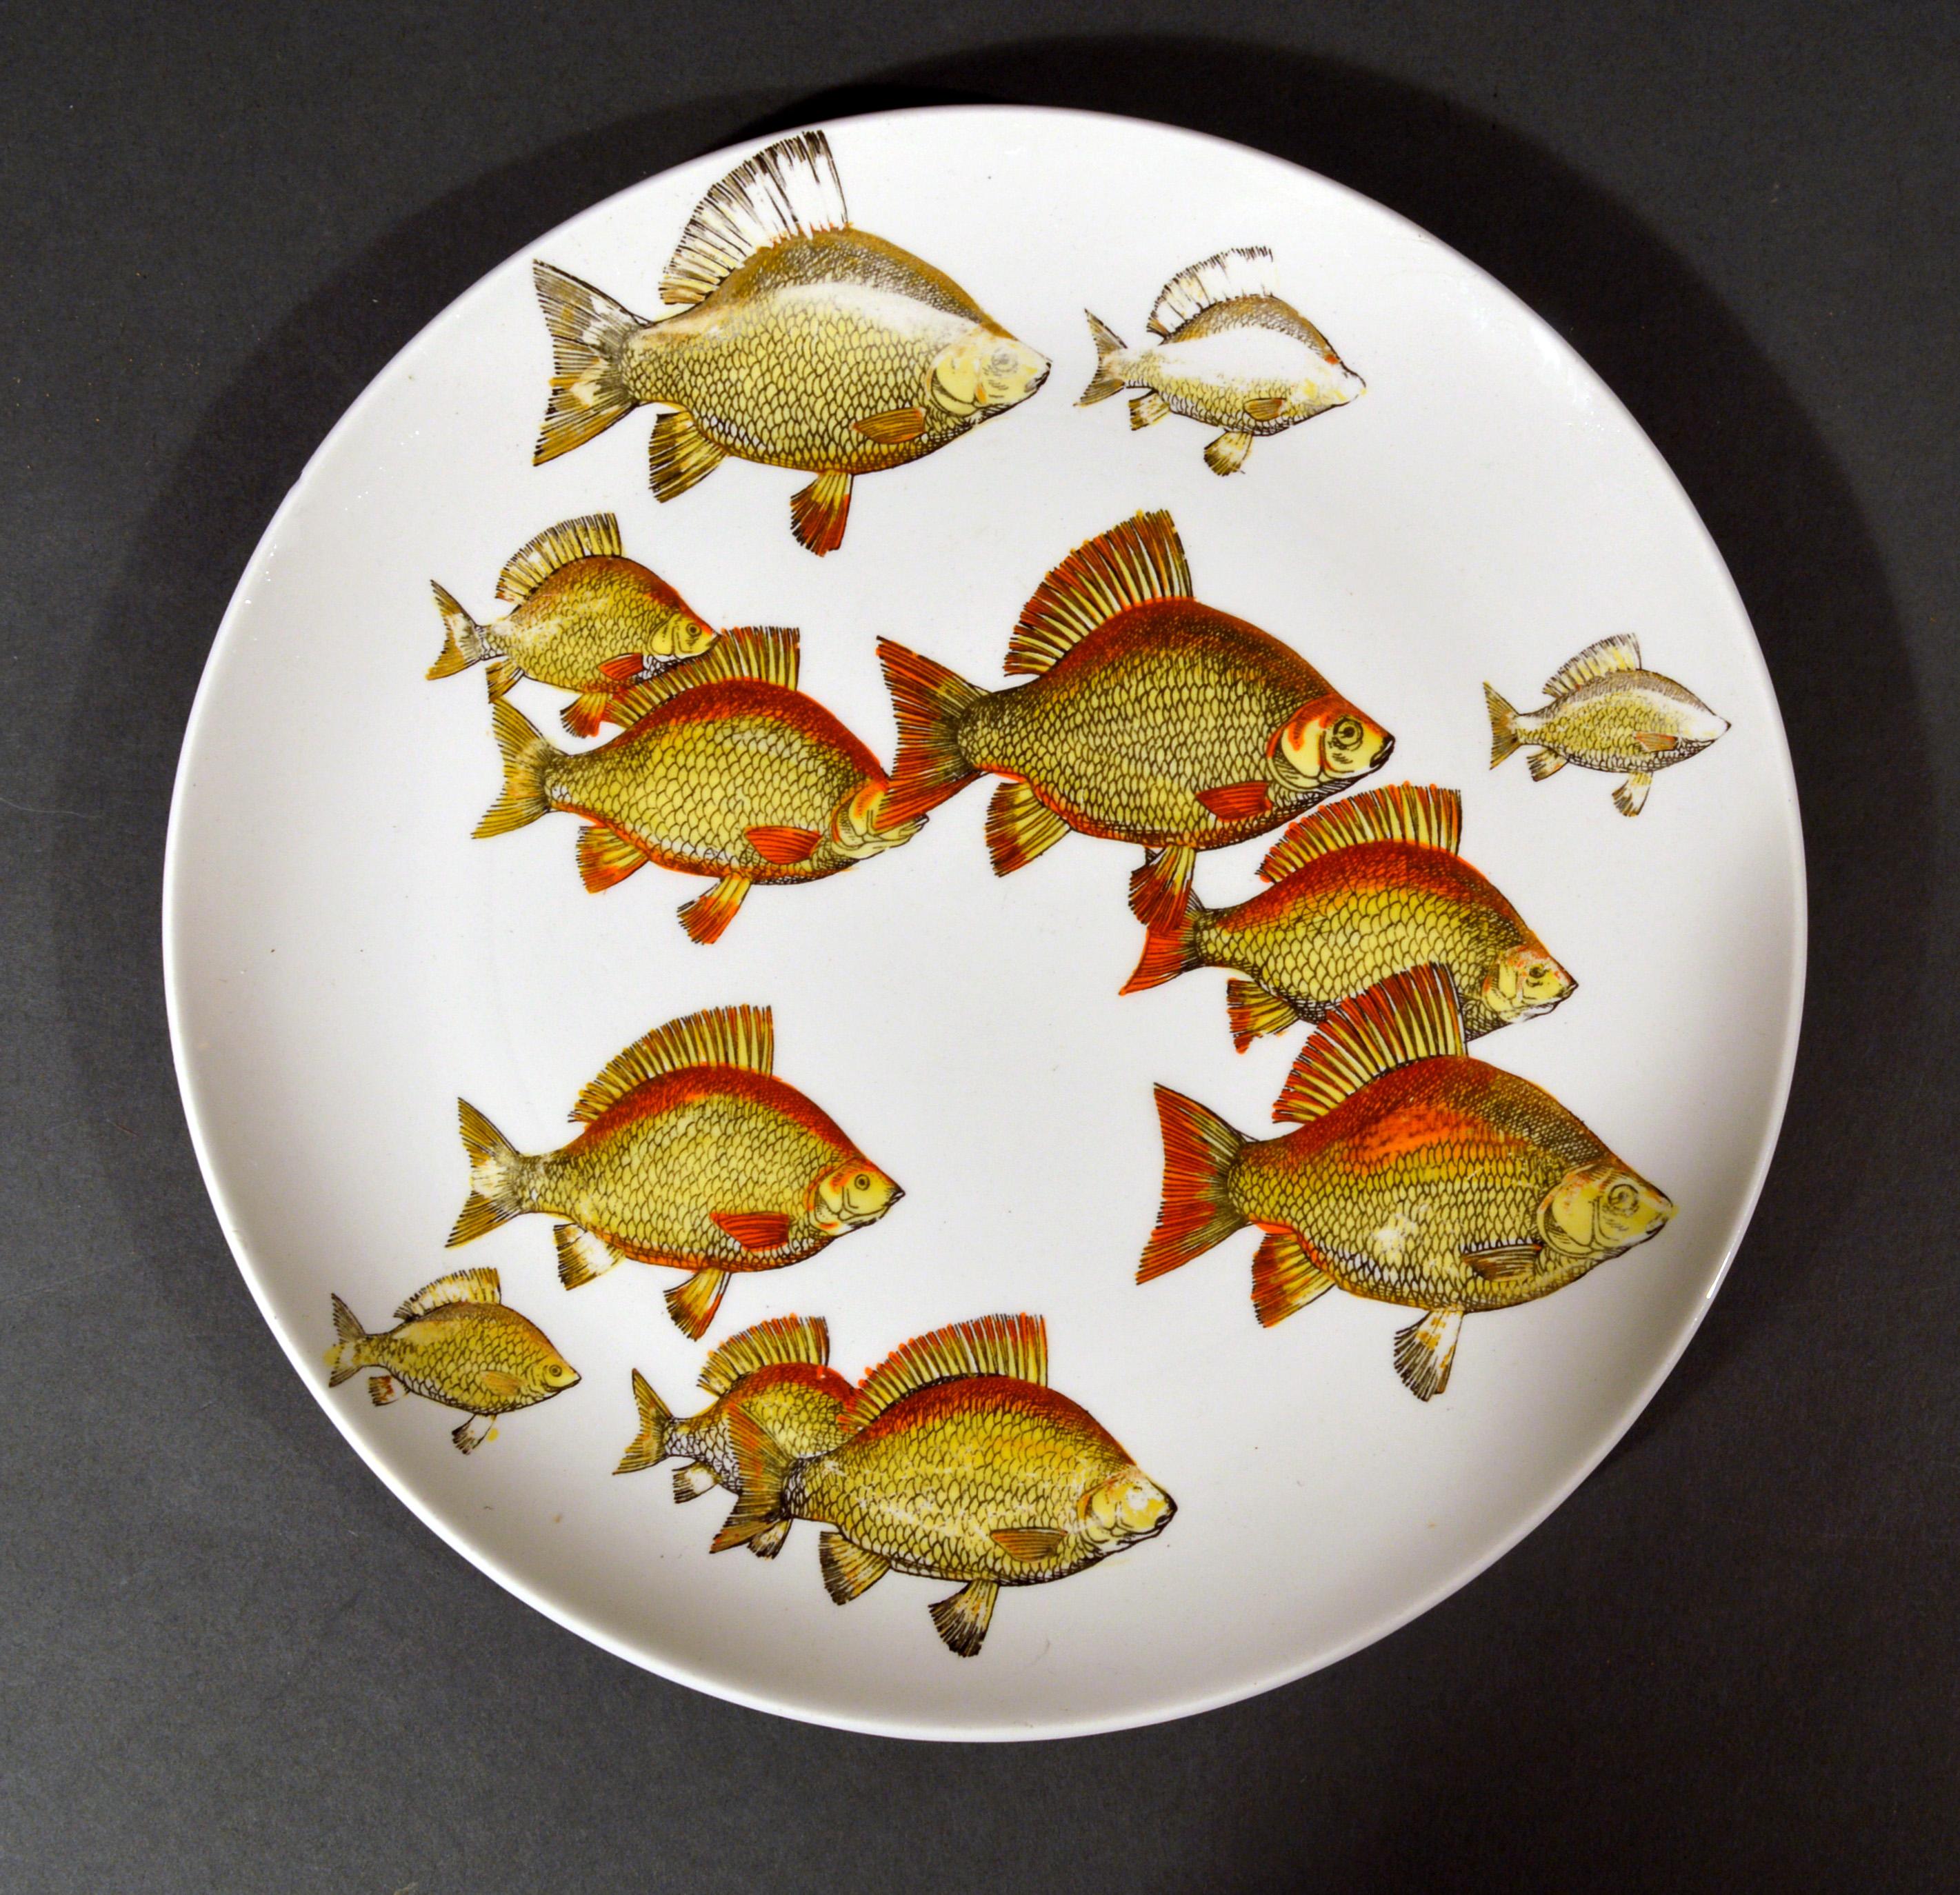 Pair of rare Piero Fornasetti Fish Plates,
Pesci pattern or Passage of Fish,
Numbered # 2 & 3,
circa 1960s

The porcelain plates depict two different schools of fish swimming together across the plate. 

Each plate is numbered- the green-red school